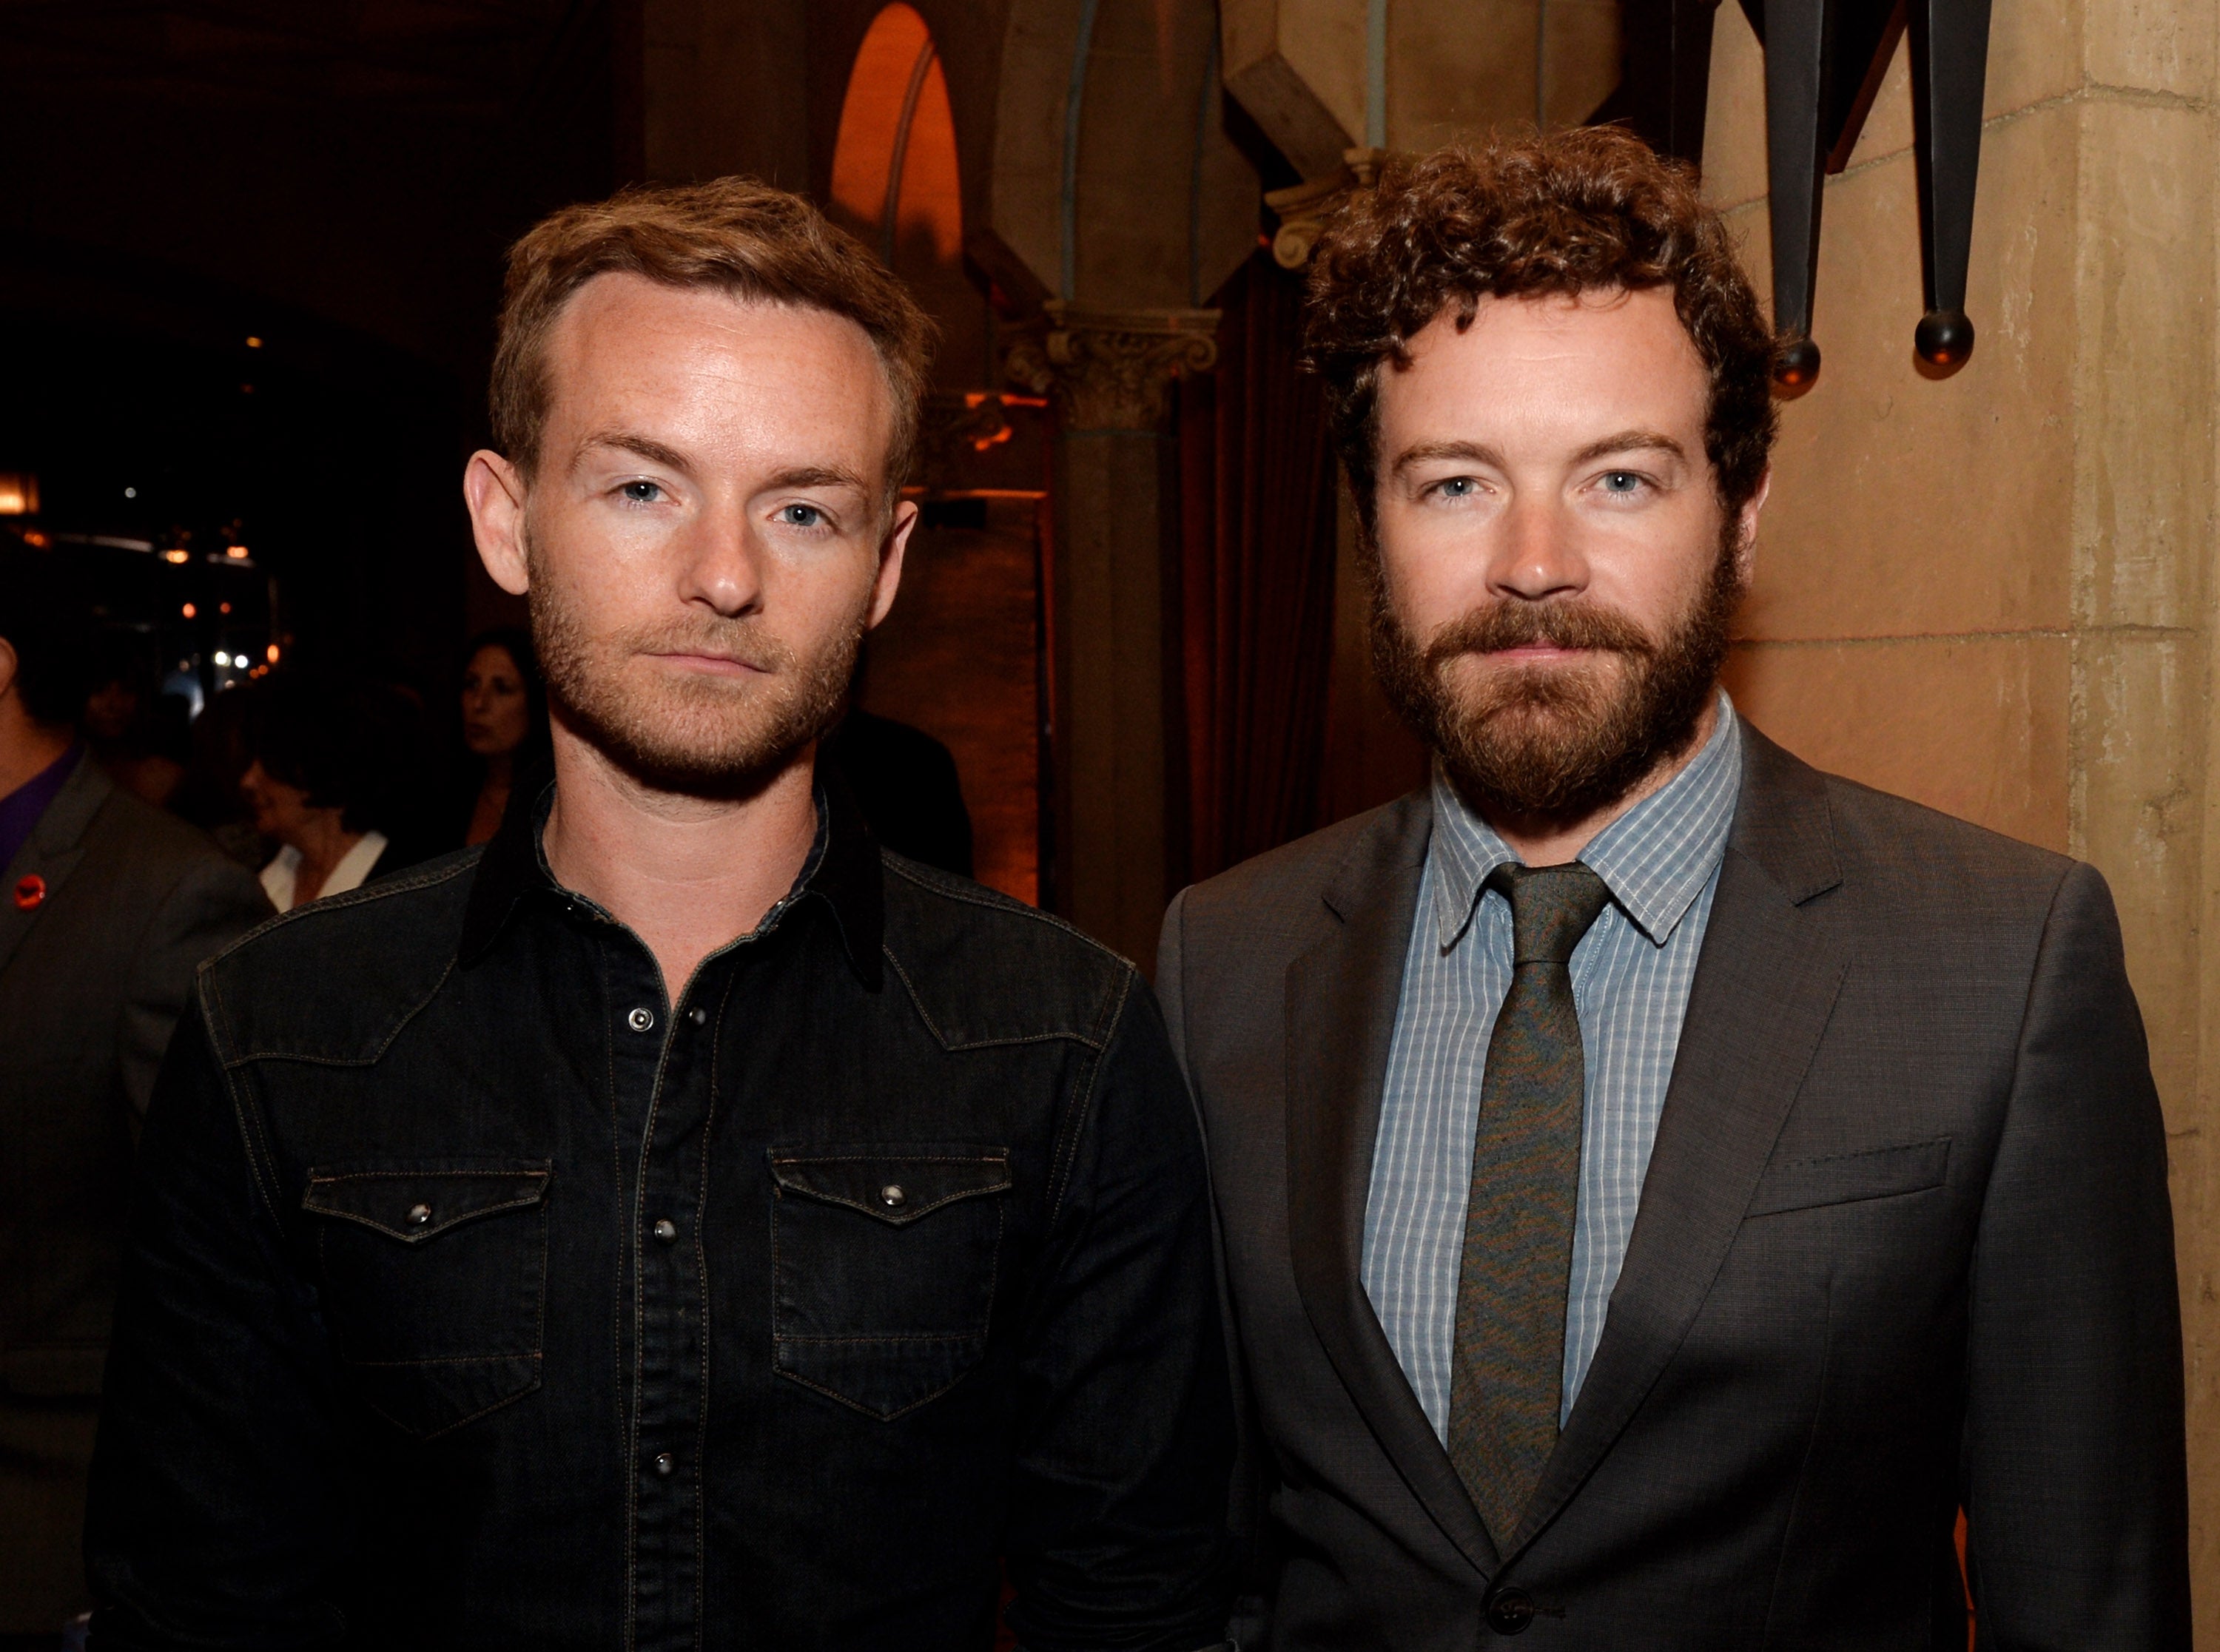 Christopher Masterson [Left] pictured with Danny Masterson [Right]